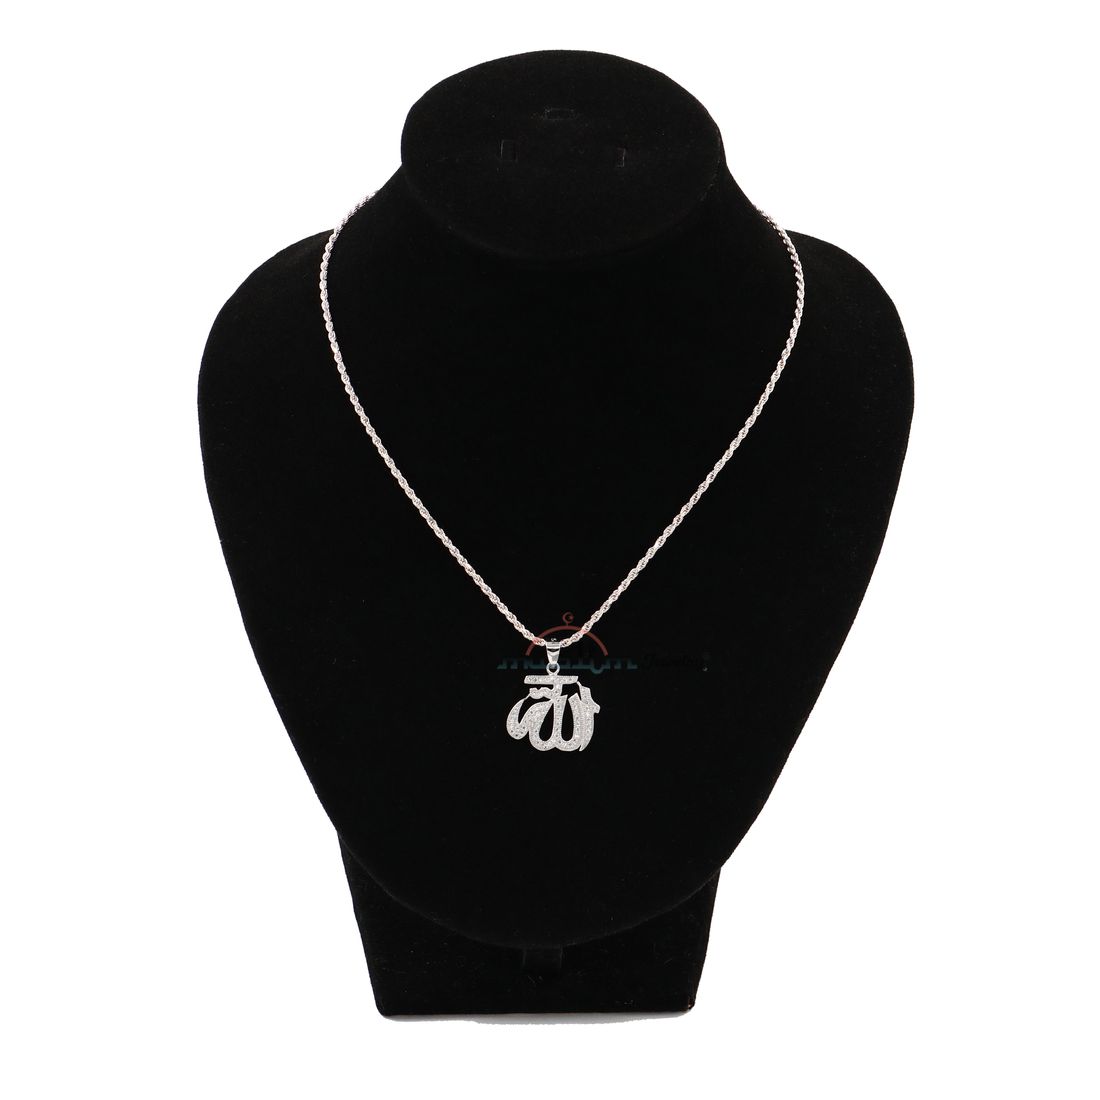 Small Allah Pendant Rhodium-plated Silver with Cubic Zirconia